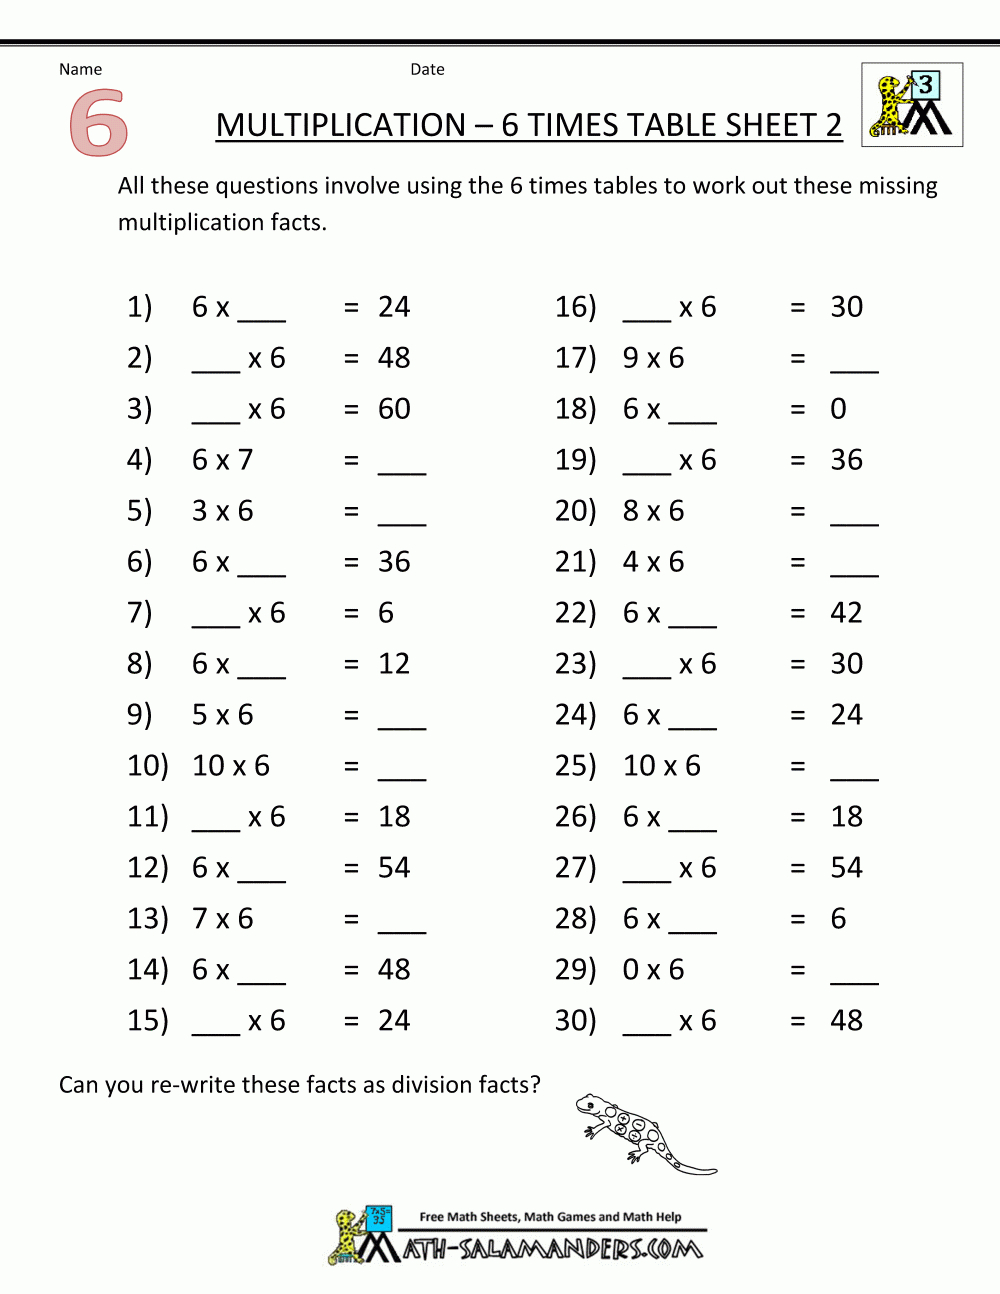 multiplication-drill-x6-worksheet-multiplication-facts-x6-practice